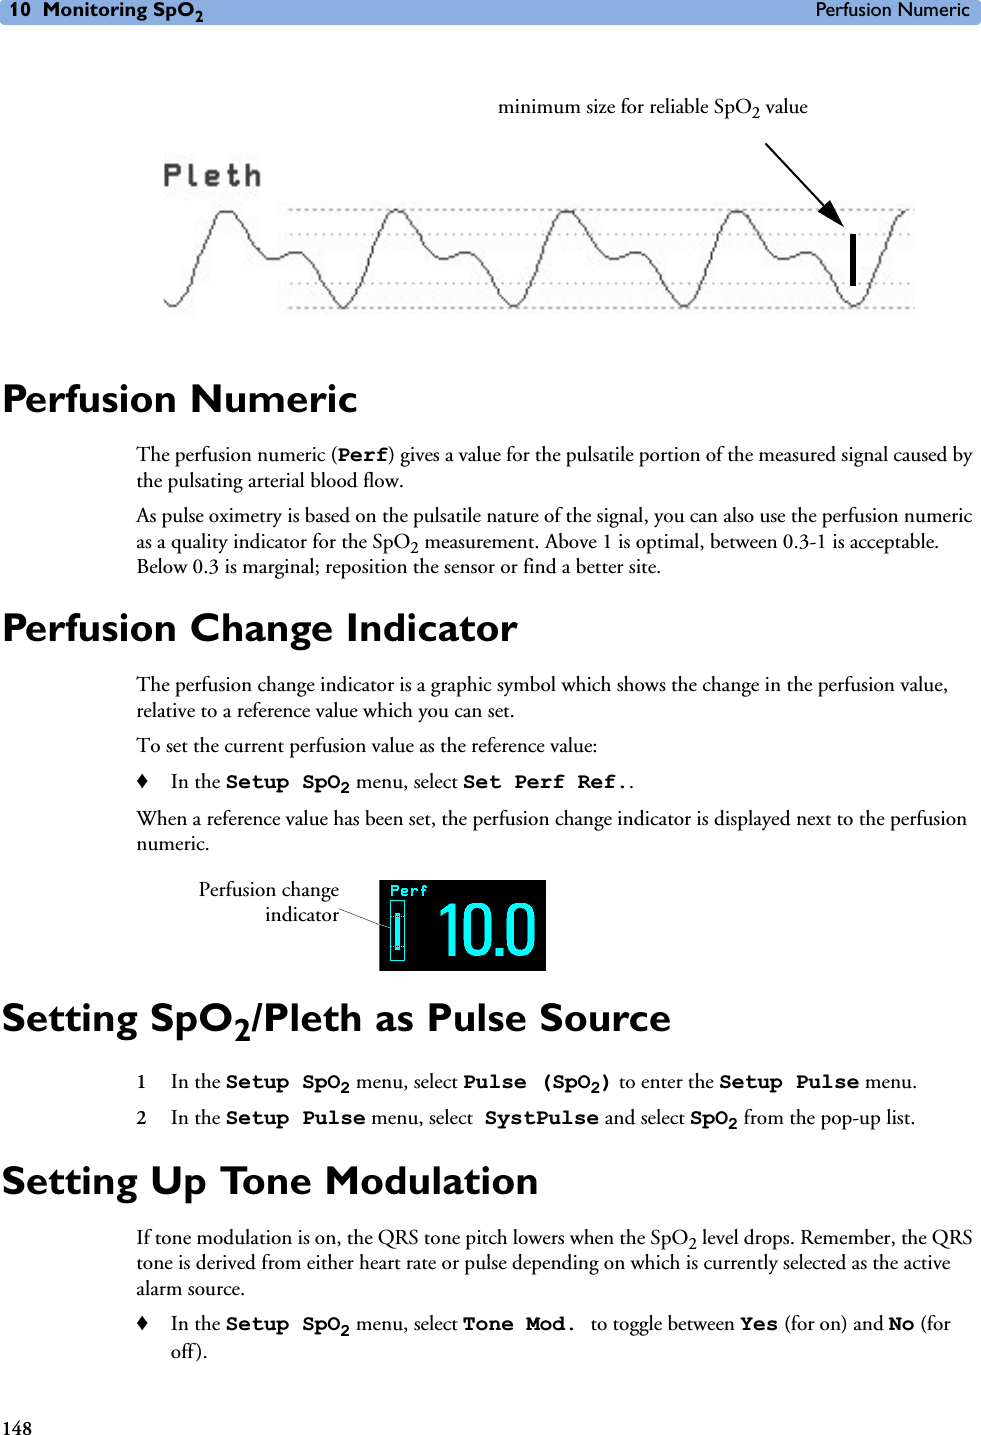 10 Monitoring SpO2Perfusion Numeric148 Perfusion NumericThe perfusion numeric (Perf) gives a value for the pulsatile portion of the measured signal caused by the pulsating arterial blood flow.As pulse oximetry is based on the pulsatile nature of the signal, you can also use the perfusion numeric as a quality indicator for the SpO2 measurement. Above 1 is optimal, between 0.3-1 is acceptable. Below 0.3 is marginal; reposition the sensor or find a better site.Perfusion Change IndicatorThe perfusion change indicator is a graphic symbol which shows the change in the perfusion value, relative to a reference value which you can set. To set the current perfusion value as the reference value:♦In the Setup SpO2 menu, select Set Perf Ref..When a reference value has been set, the perfusion change indicator is displayed next to the perfusion numeric.Setting SpO2/Pleth as Pulse Source1In the Setup SpO2 menu, select Pulse (SpO2) to enter the Setup Pulse menu.2In the Setup Pulse menu, select SystPulse and select SpO2 from the pop-up list.Setting Up Tone ModulationIf tone modulation is on, the QRS tone pitch lowers when the SpO2 level drops. Remember, the QRS tone is derived from either heart rate or pulse depending on which is currently selected as the active alarm source. ♦In the Setup SpO2 menu, select Tone Mod. to toggle between Yes (for on) and No (for off).minimum size for reliable SpO2 valuePerfusion changeindicator